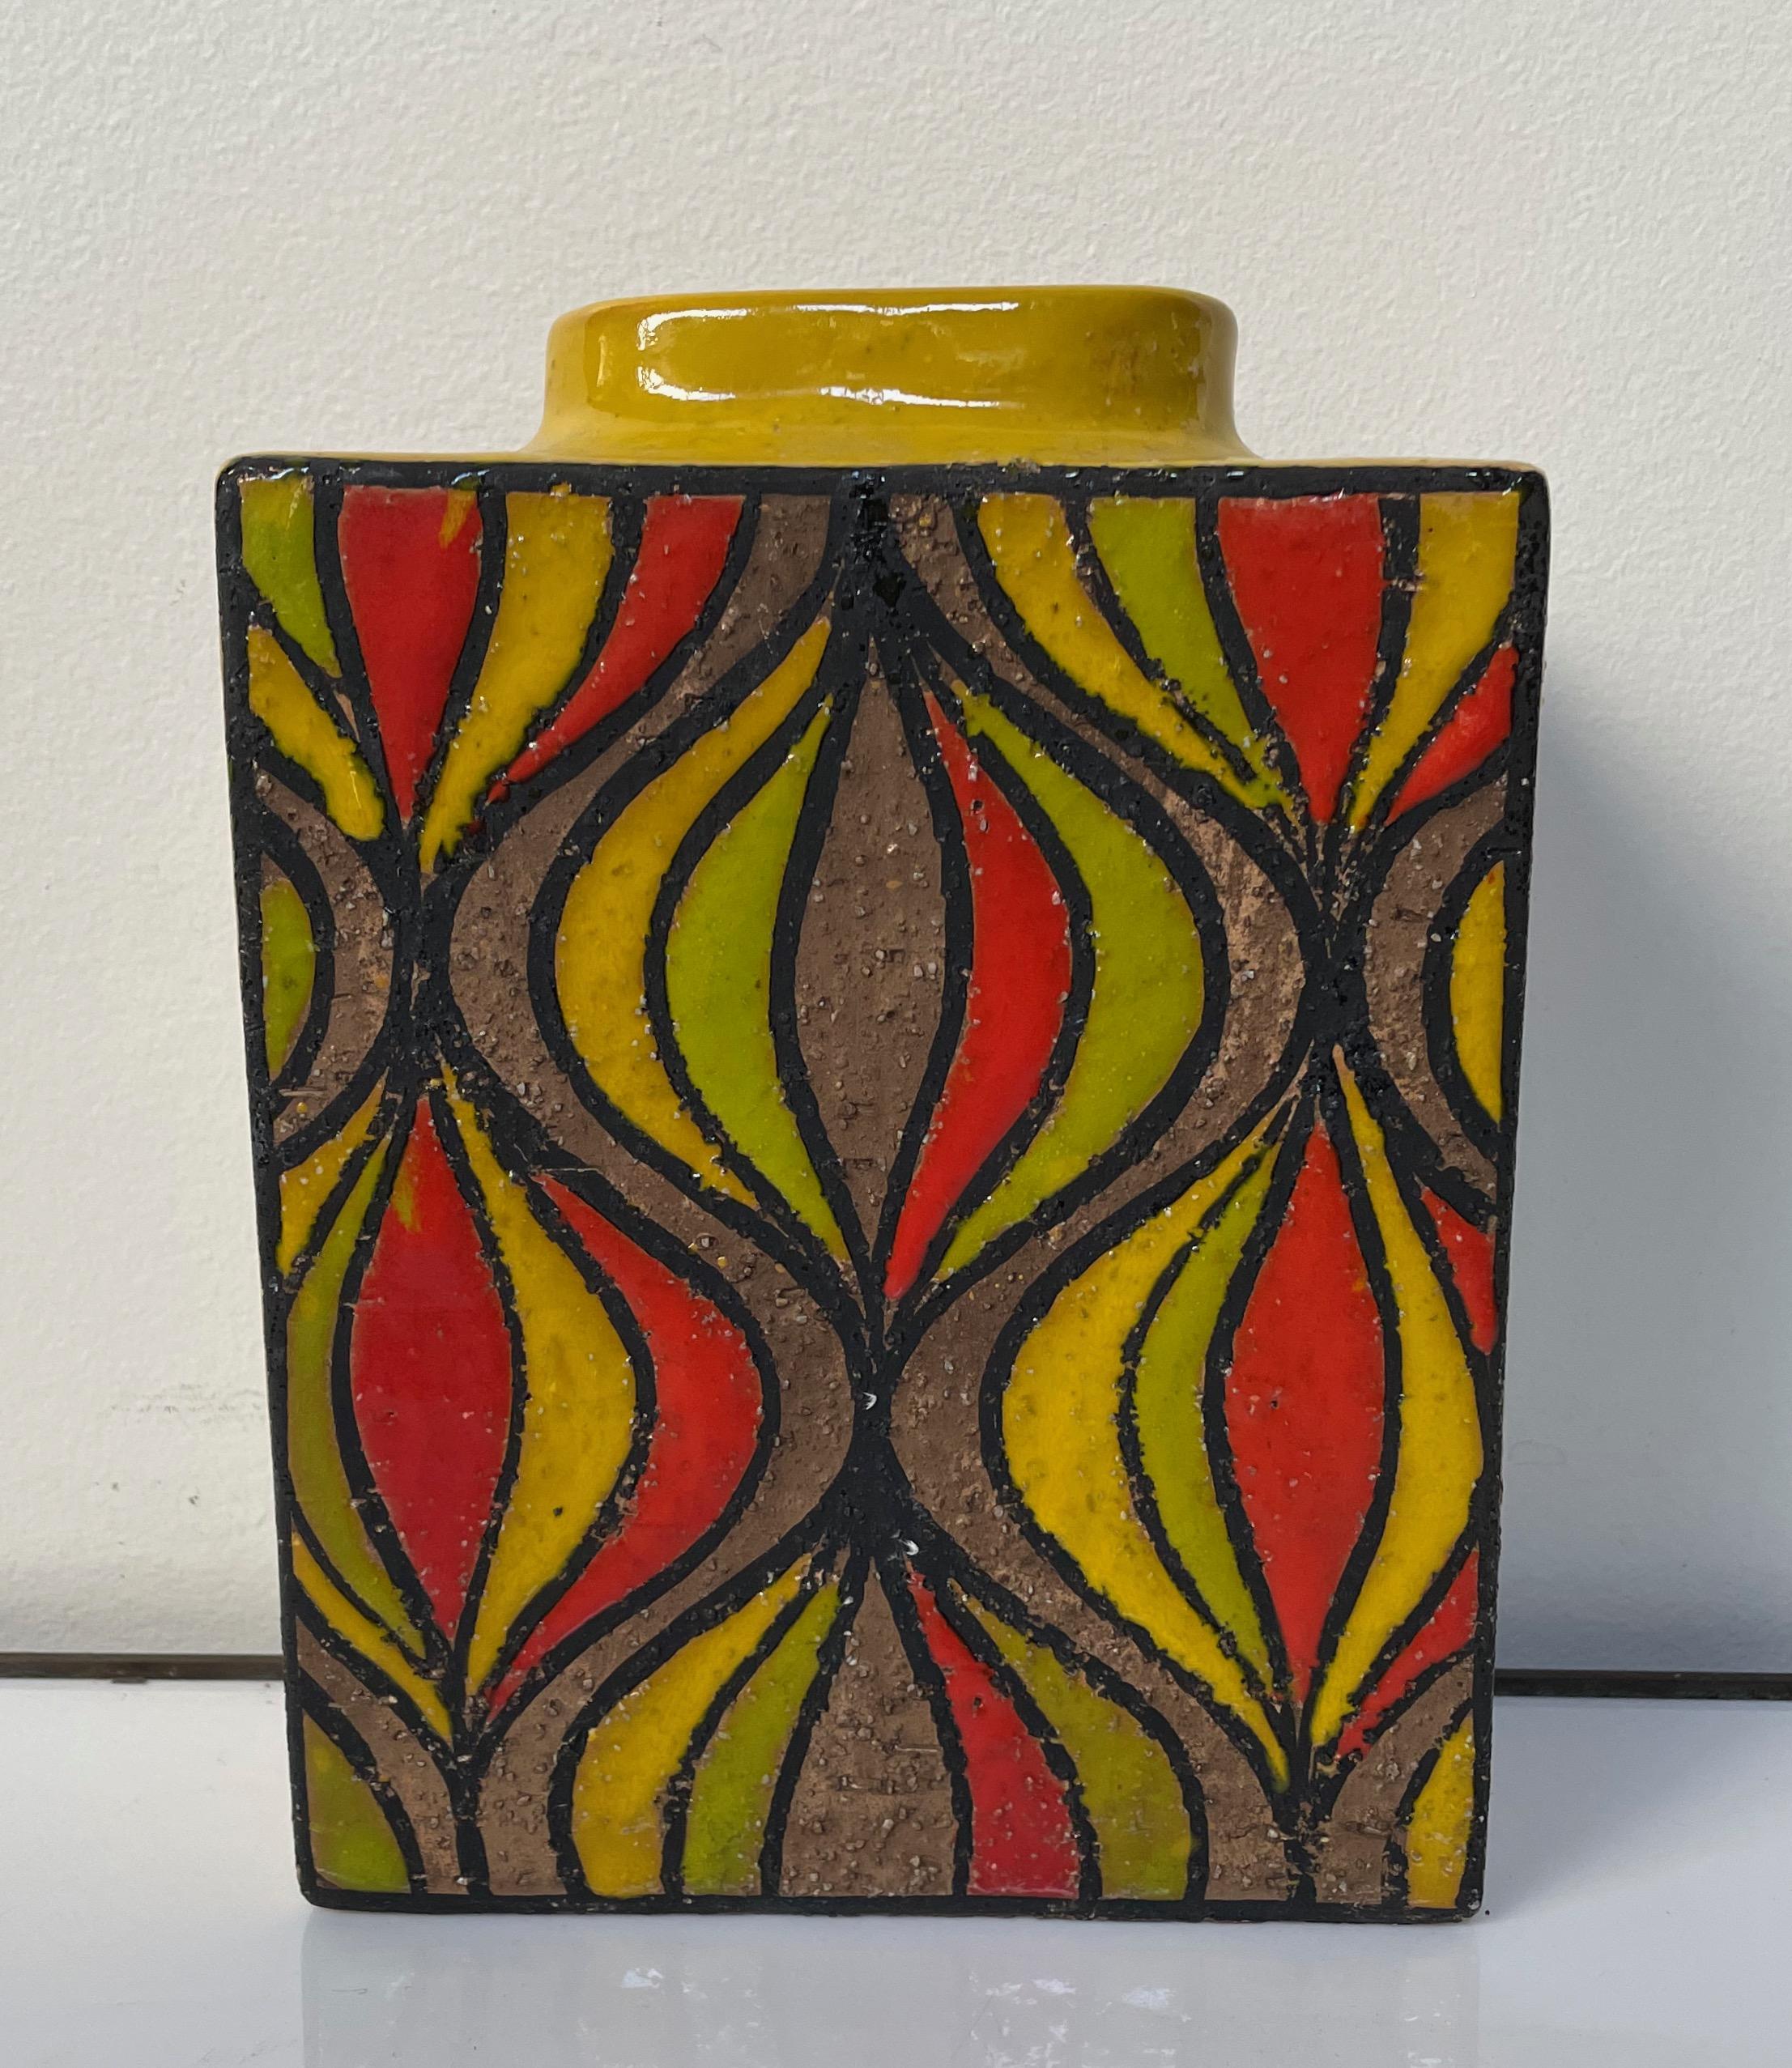 Unusual Rosenthal Netter vase by Bittosi in the rare onion pattern red, yellow, green, and brown.